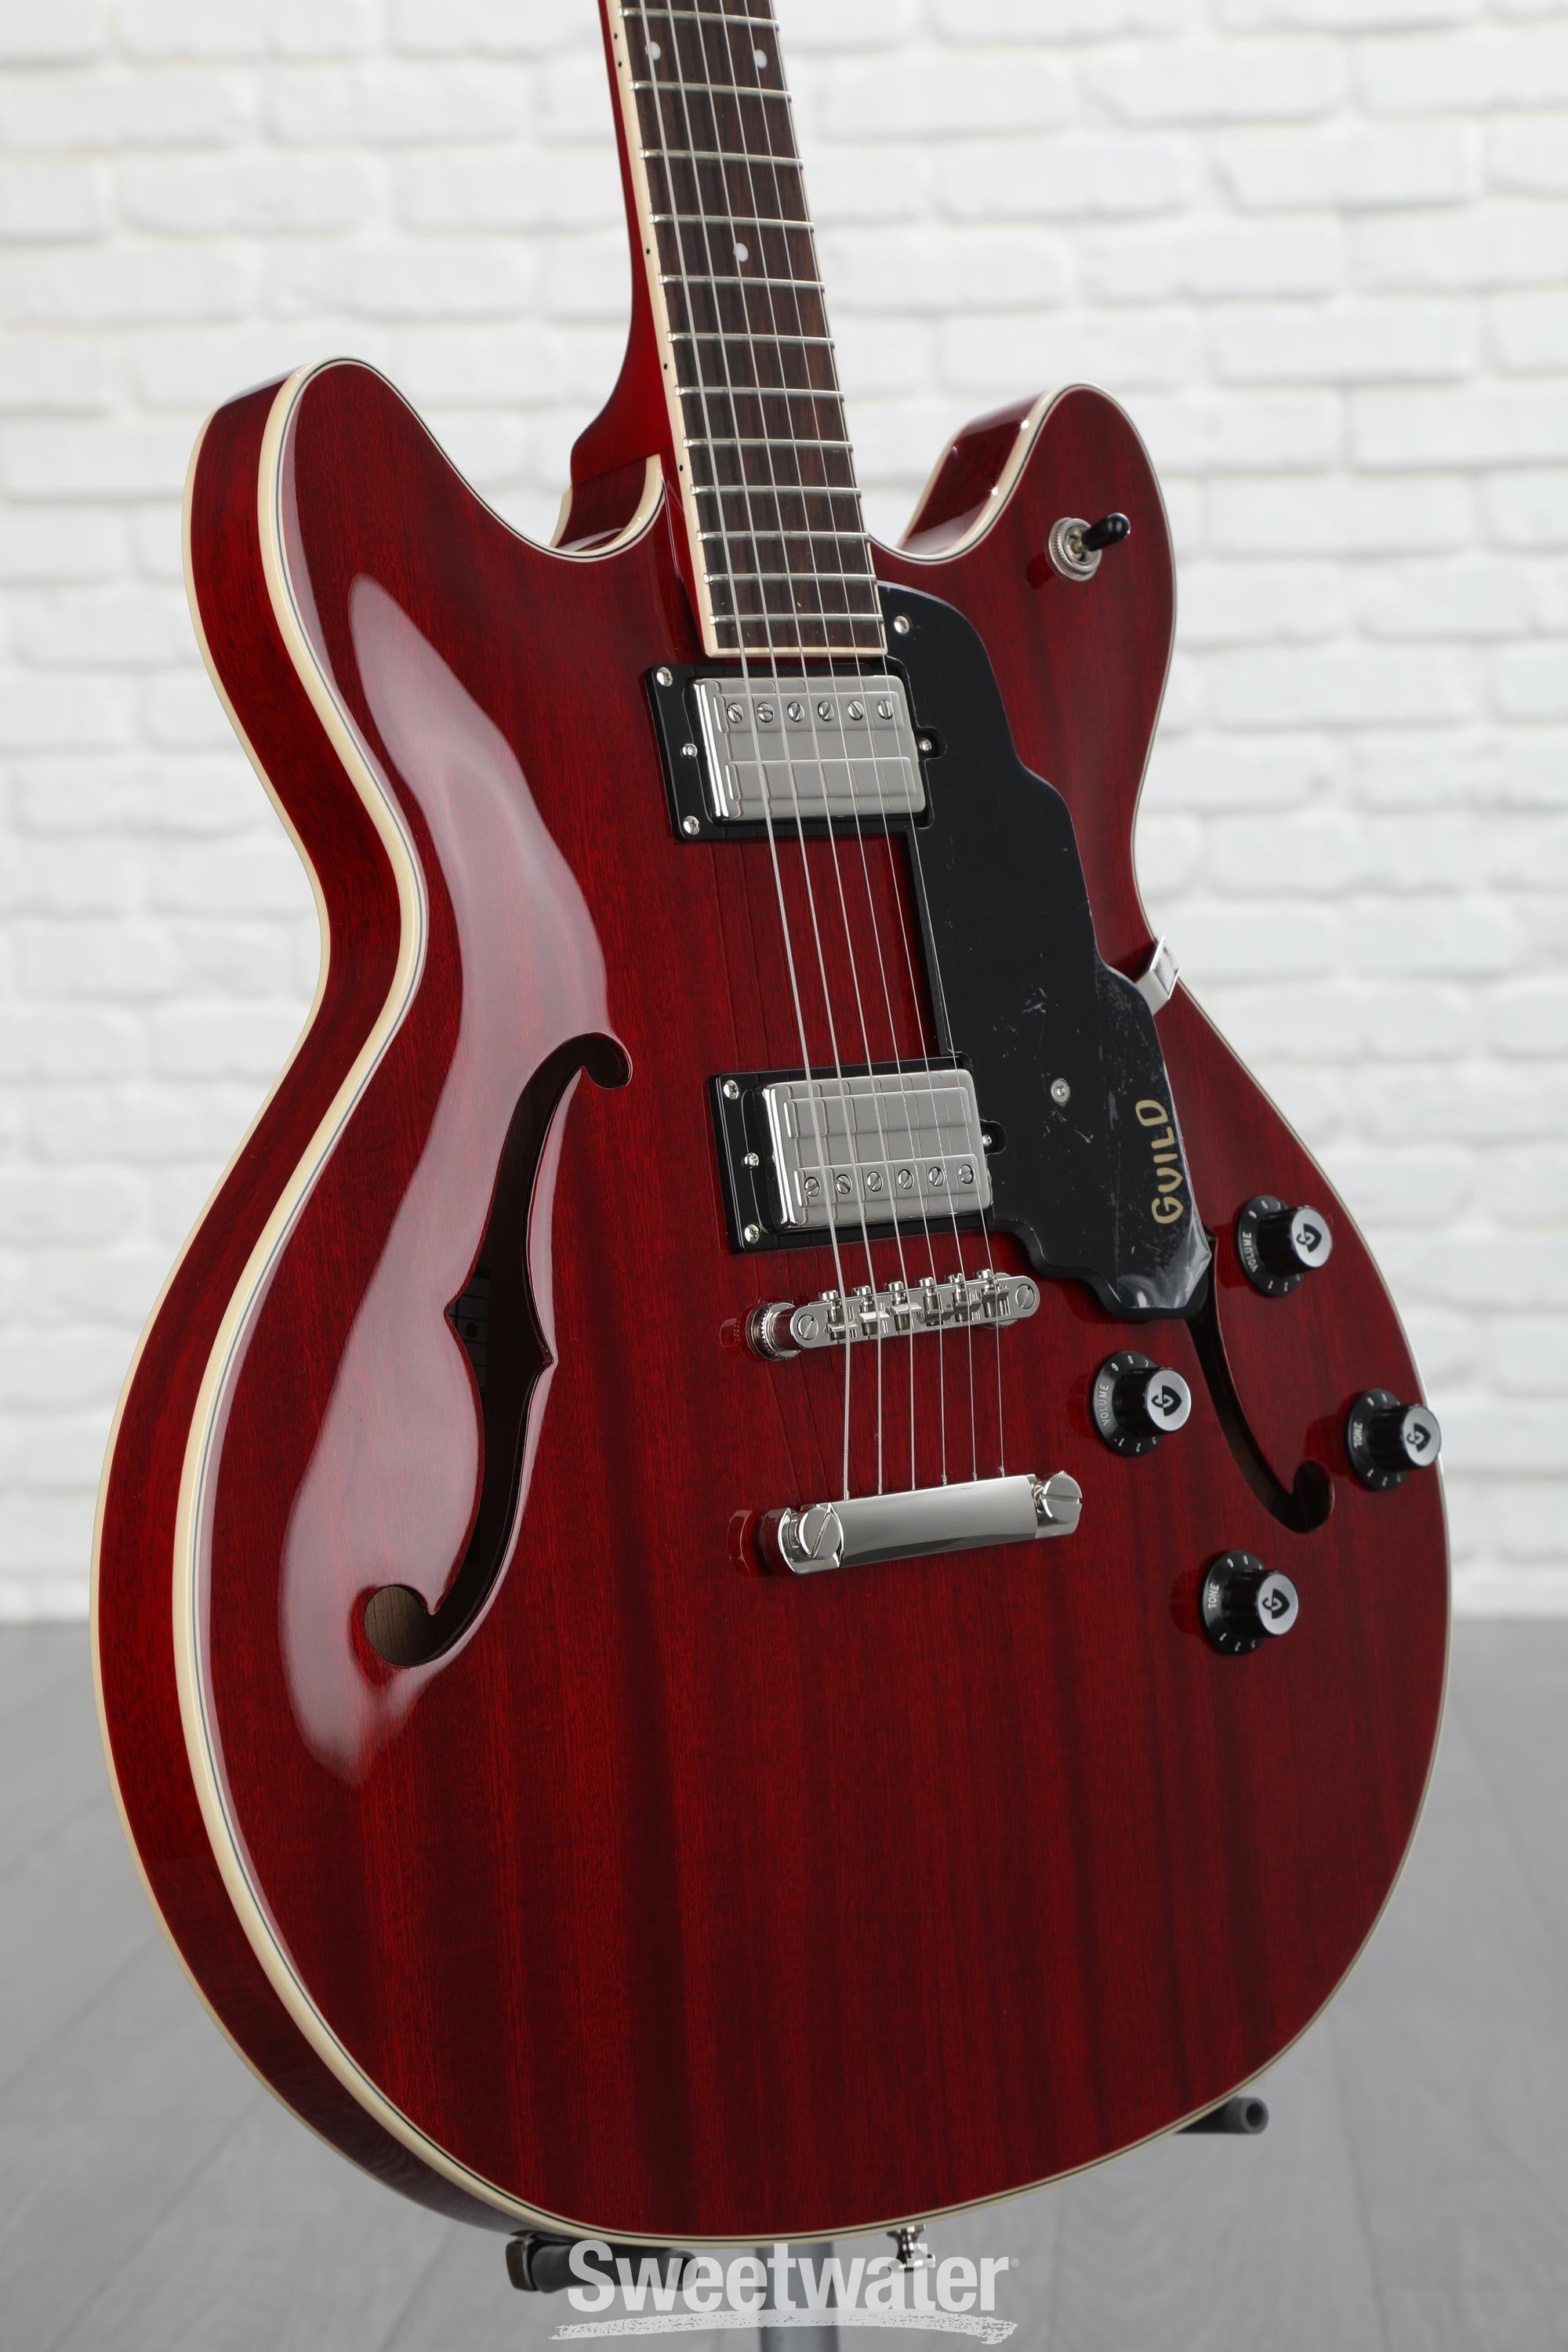 Guild Starfire I DC Semi-hollow Electric Guitar - Cherry Red